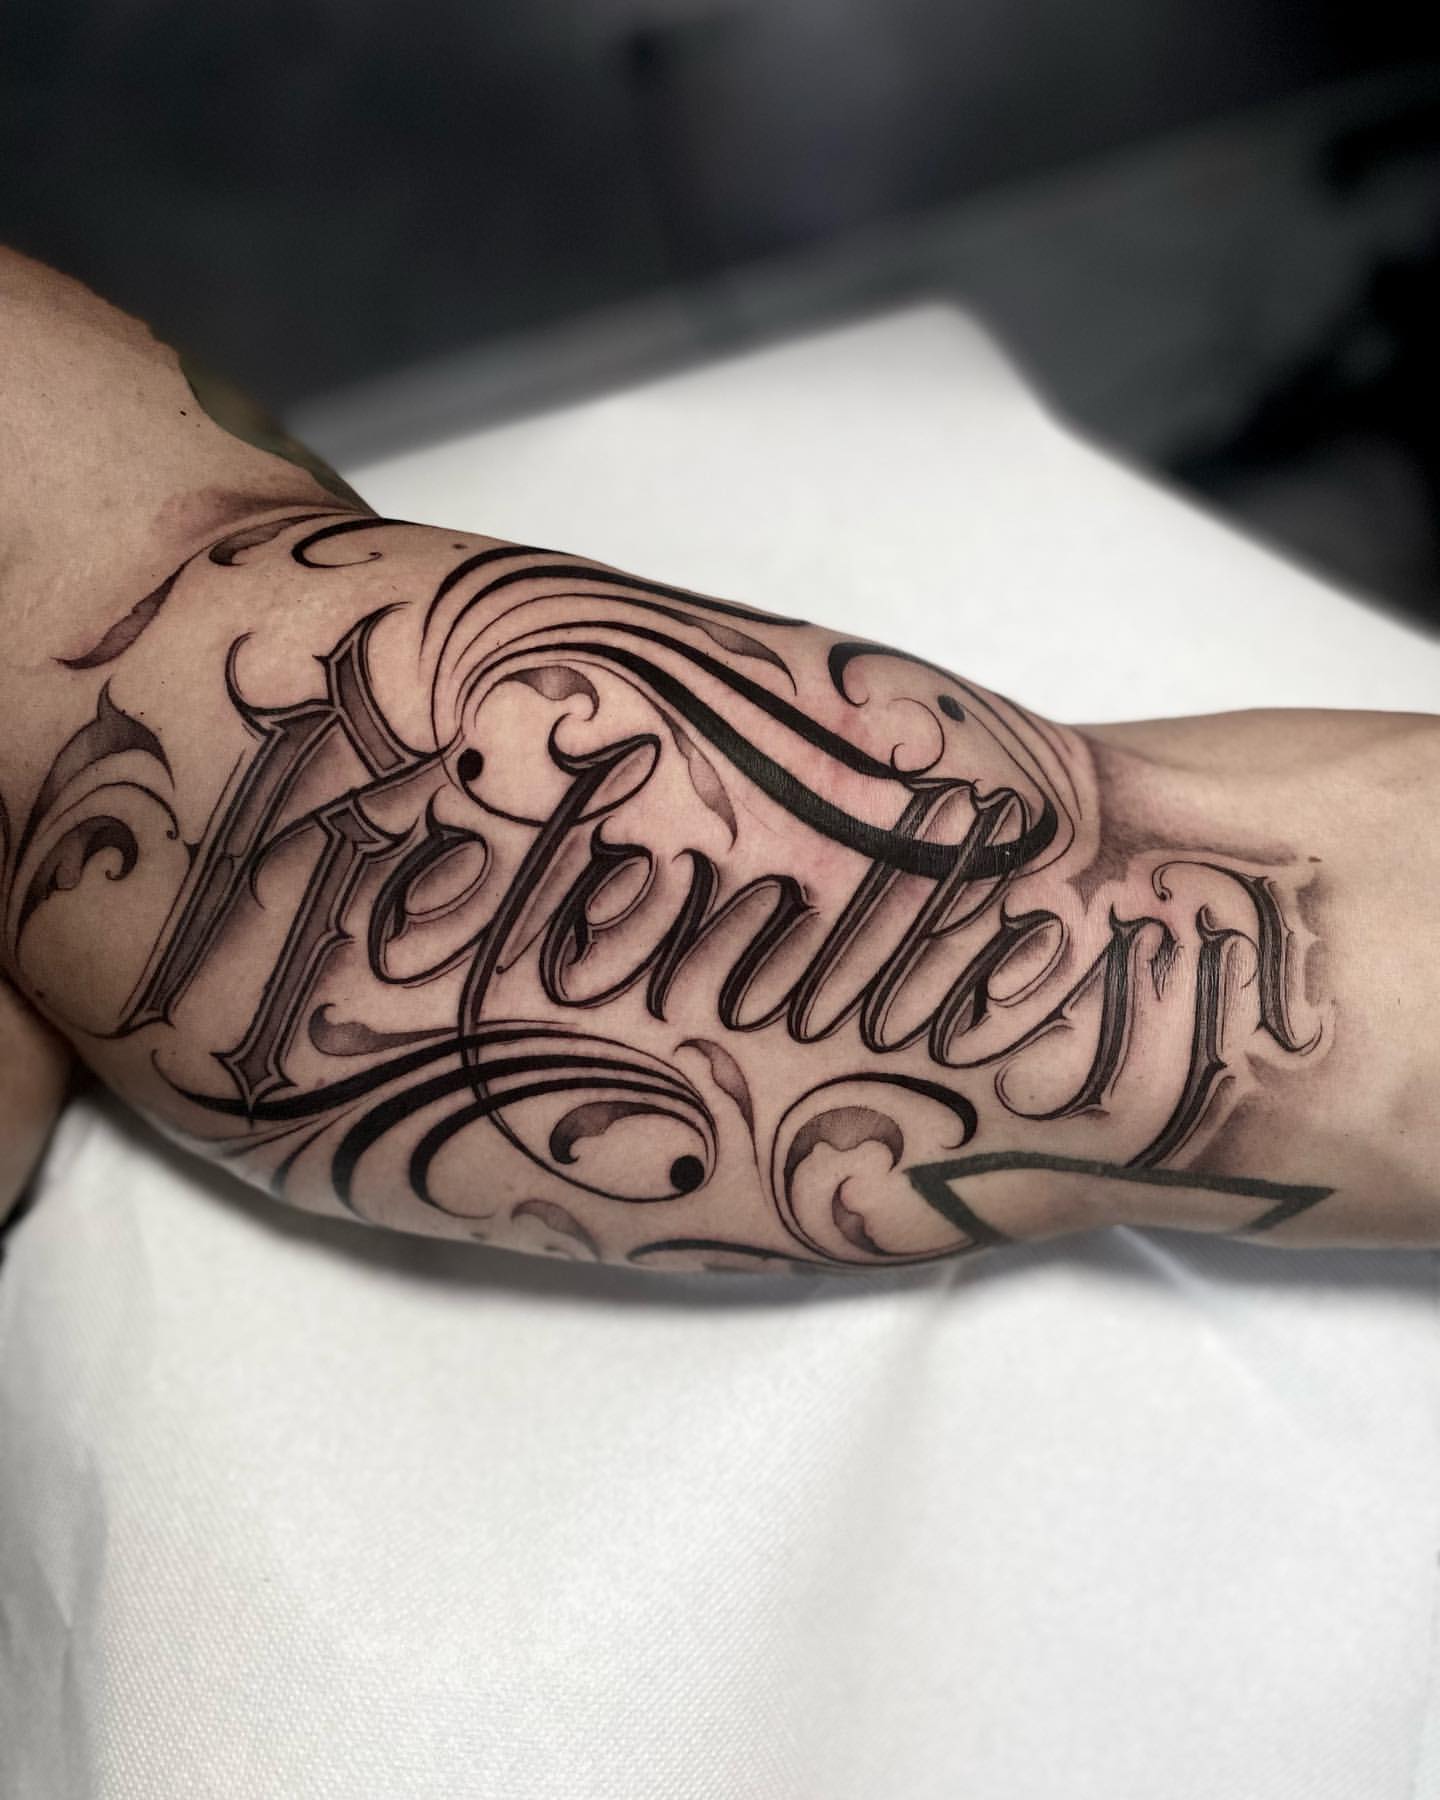 Discover 172+ bicep quote tattoos super hot